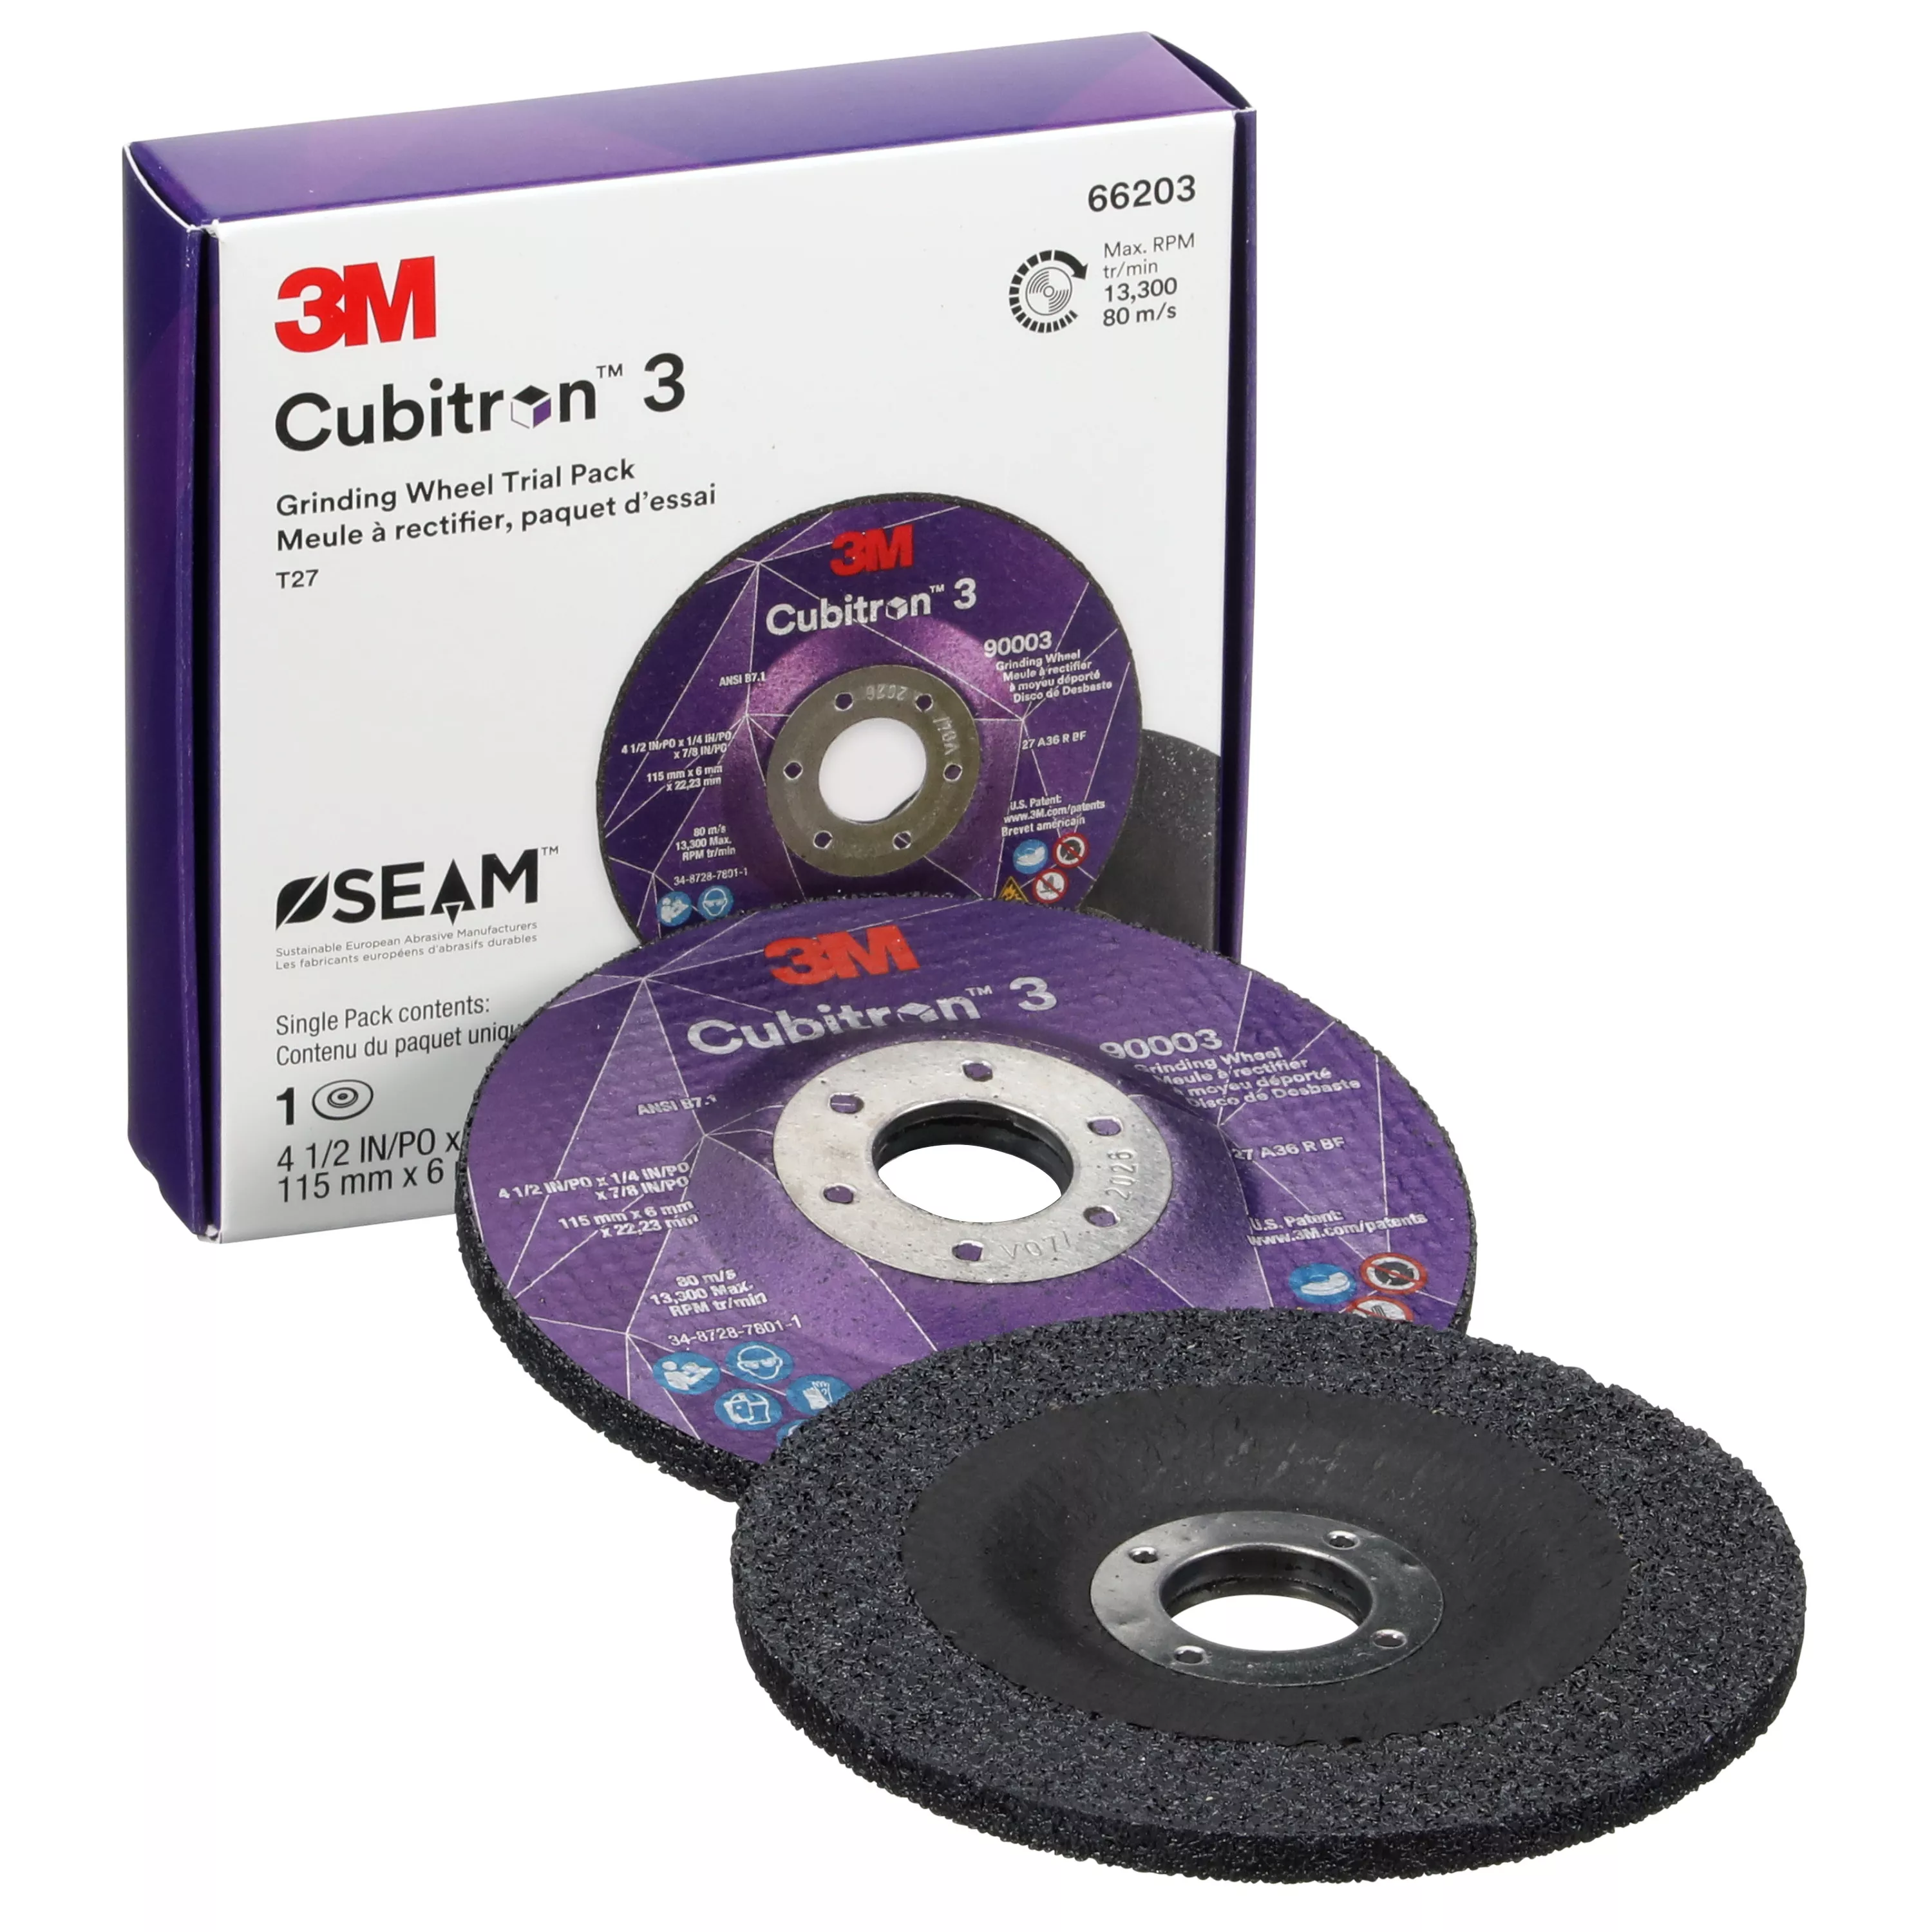 3M™ Cubitron™ 3 Depressed Center Grinding Wheel, 66203, 36+, Type 27, 4-1/2 in x 1/4 in x 7/8 in, ANSI, 10 ea/Case, Trial Pack